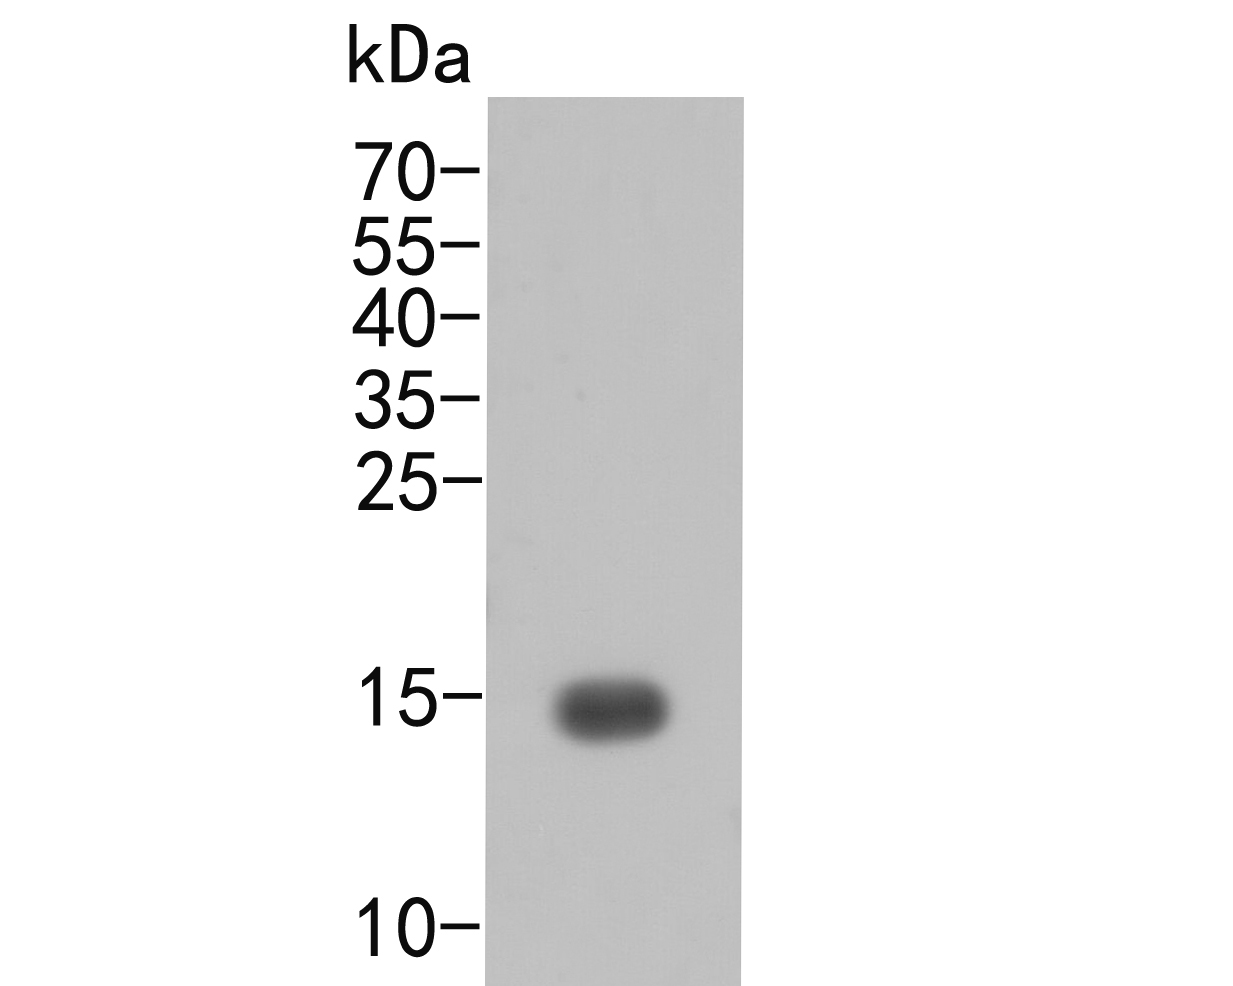 Fig1:; Western Blot analysis of recombinant murine TNF-alpha using rabbit TNF alpha antibody.; Western blot analysis of TNF alpha on recombinant protein lysate. Proteins were transferred to a PVDF membrane and blocked with 5% BSA in PBS for 1 hour at room temperature. The primary antibody ( 1/1000) was used in 5% BSA at room temperature for 2 hours. Goat Anti-Rabbit IgG - HRP Secondary Antibody (HA1001) at 1:5,000 dilution was used for 1 hour at room temperature.